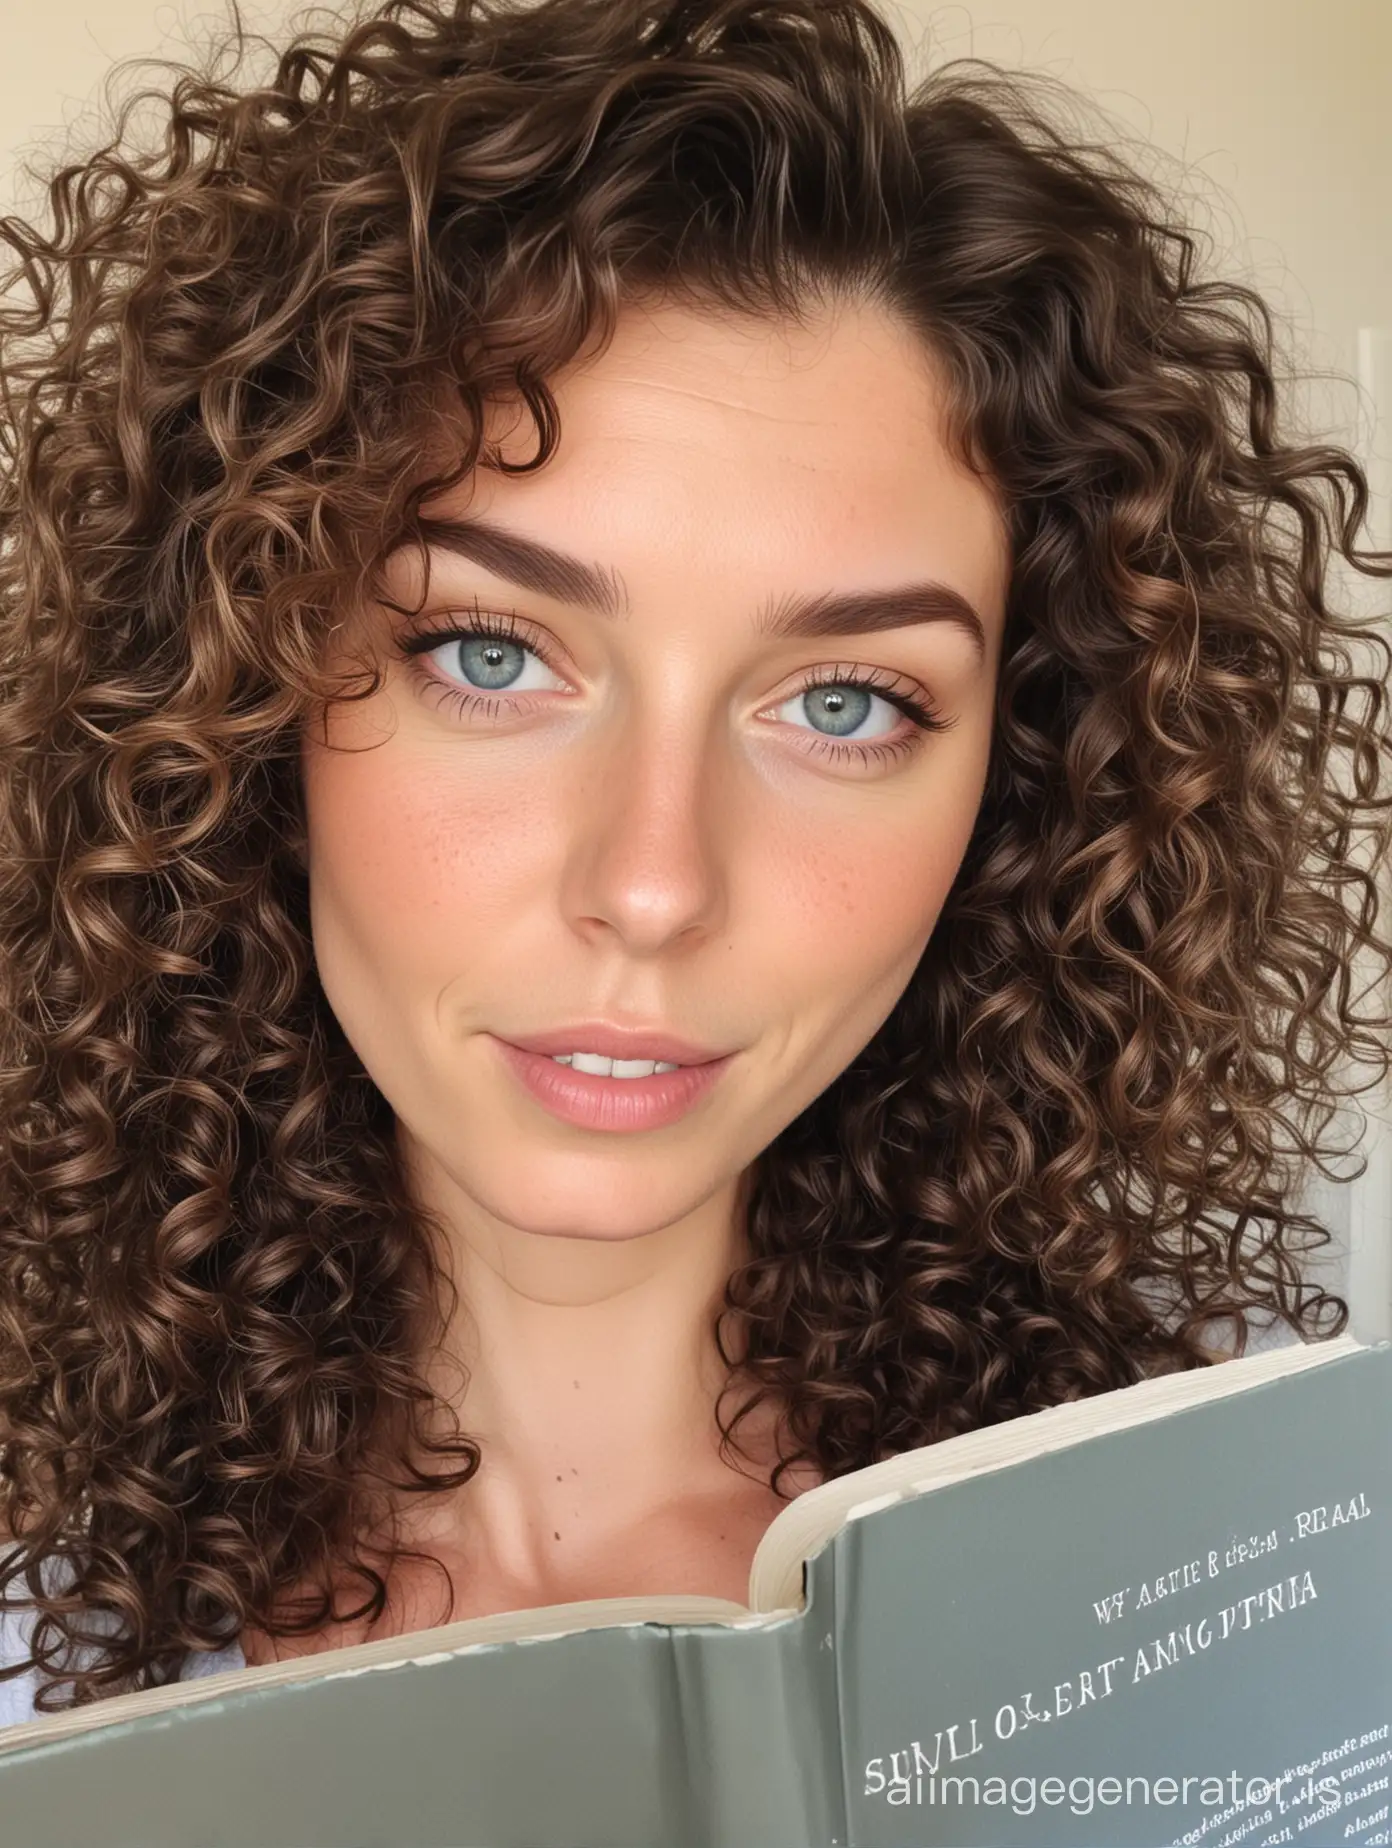 a selfie of a brunette woman with curly hair and grey-blue eyes holding up a book